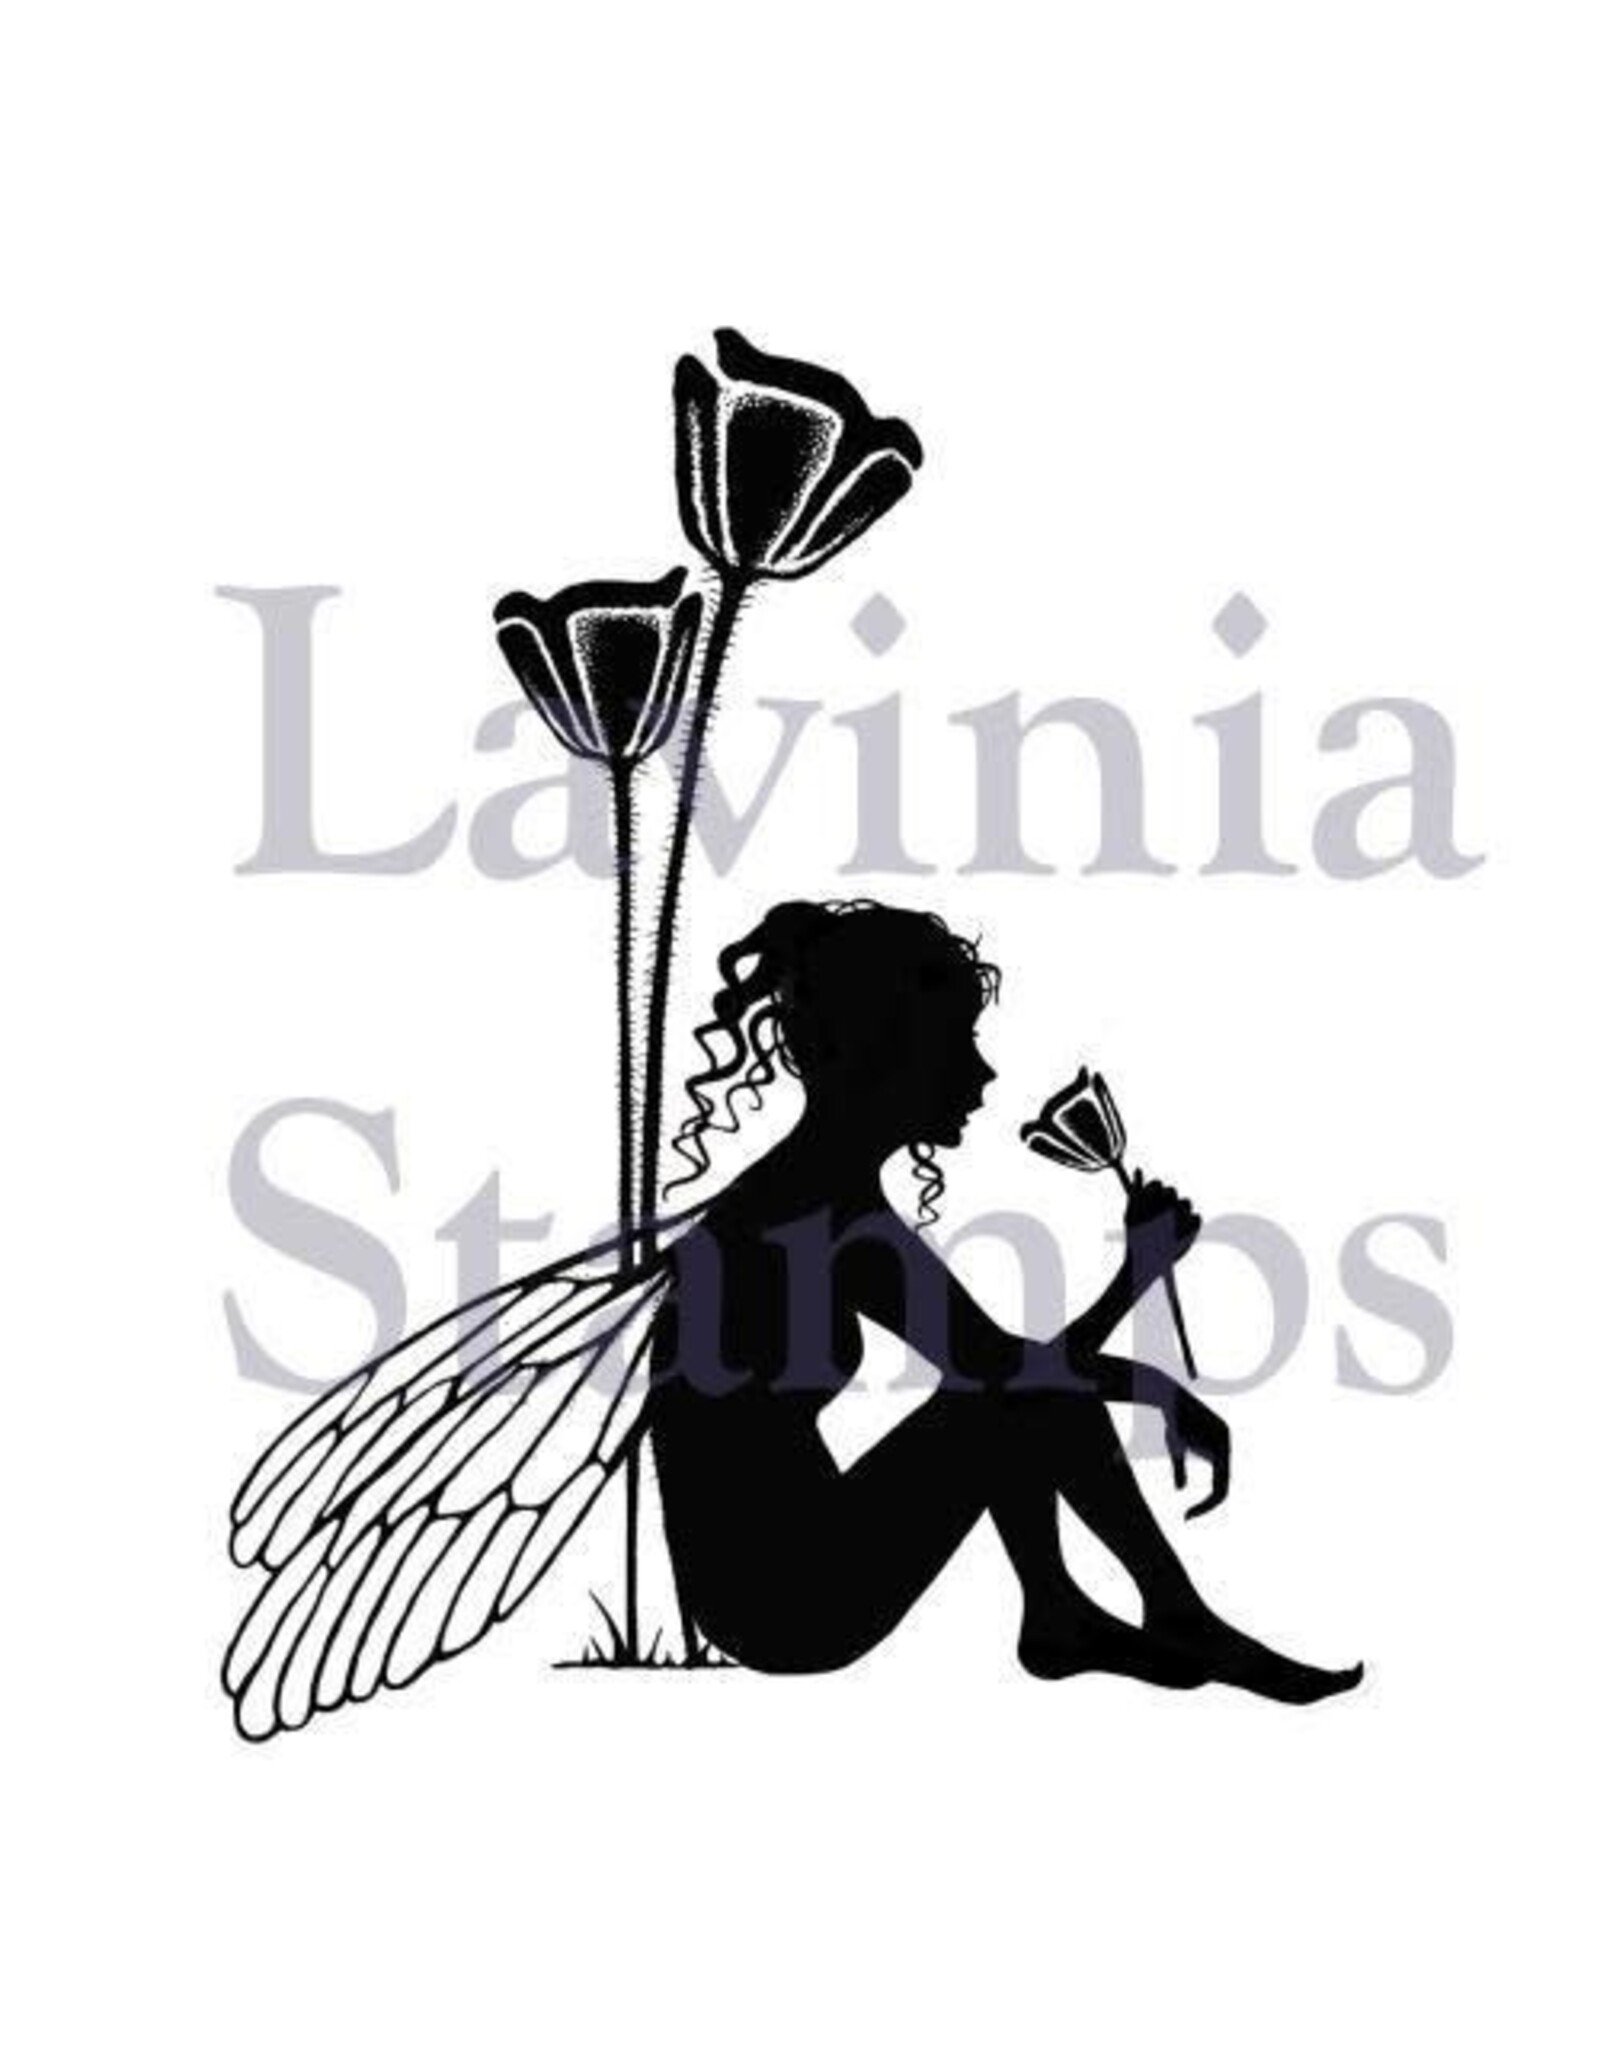 LAVINIA STAMPS LAVINIA MOMENTS LIKE THESE CLEAR STAMP